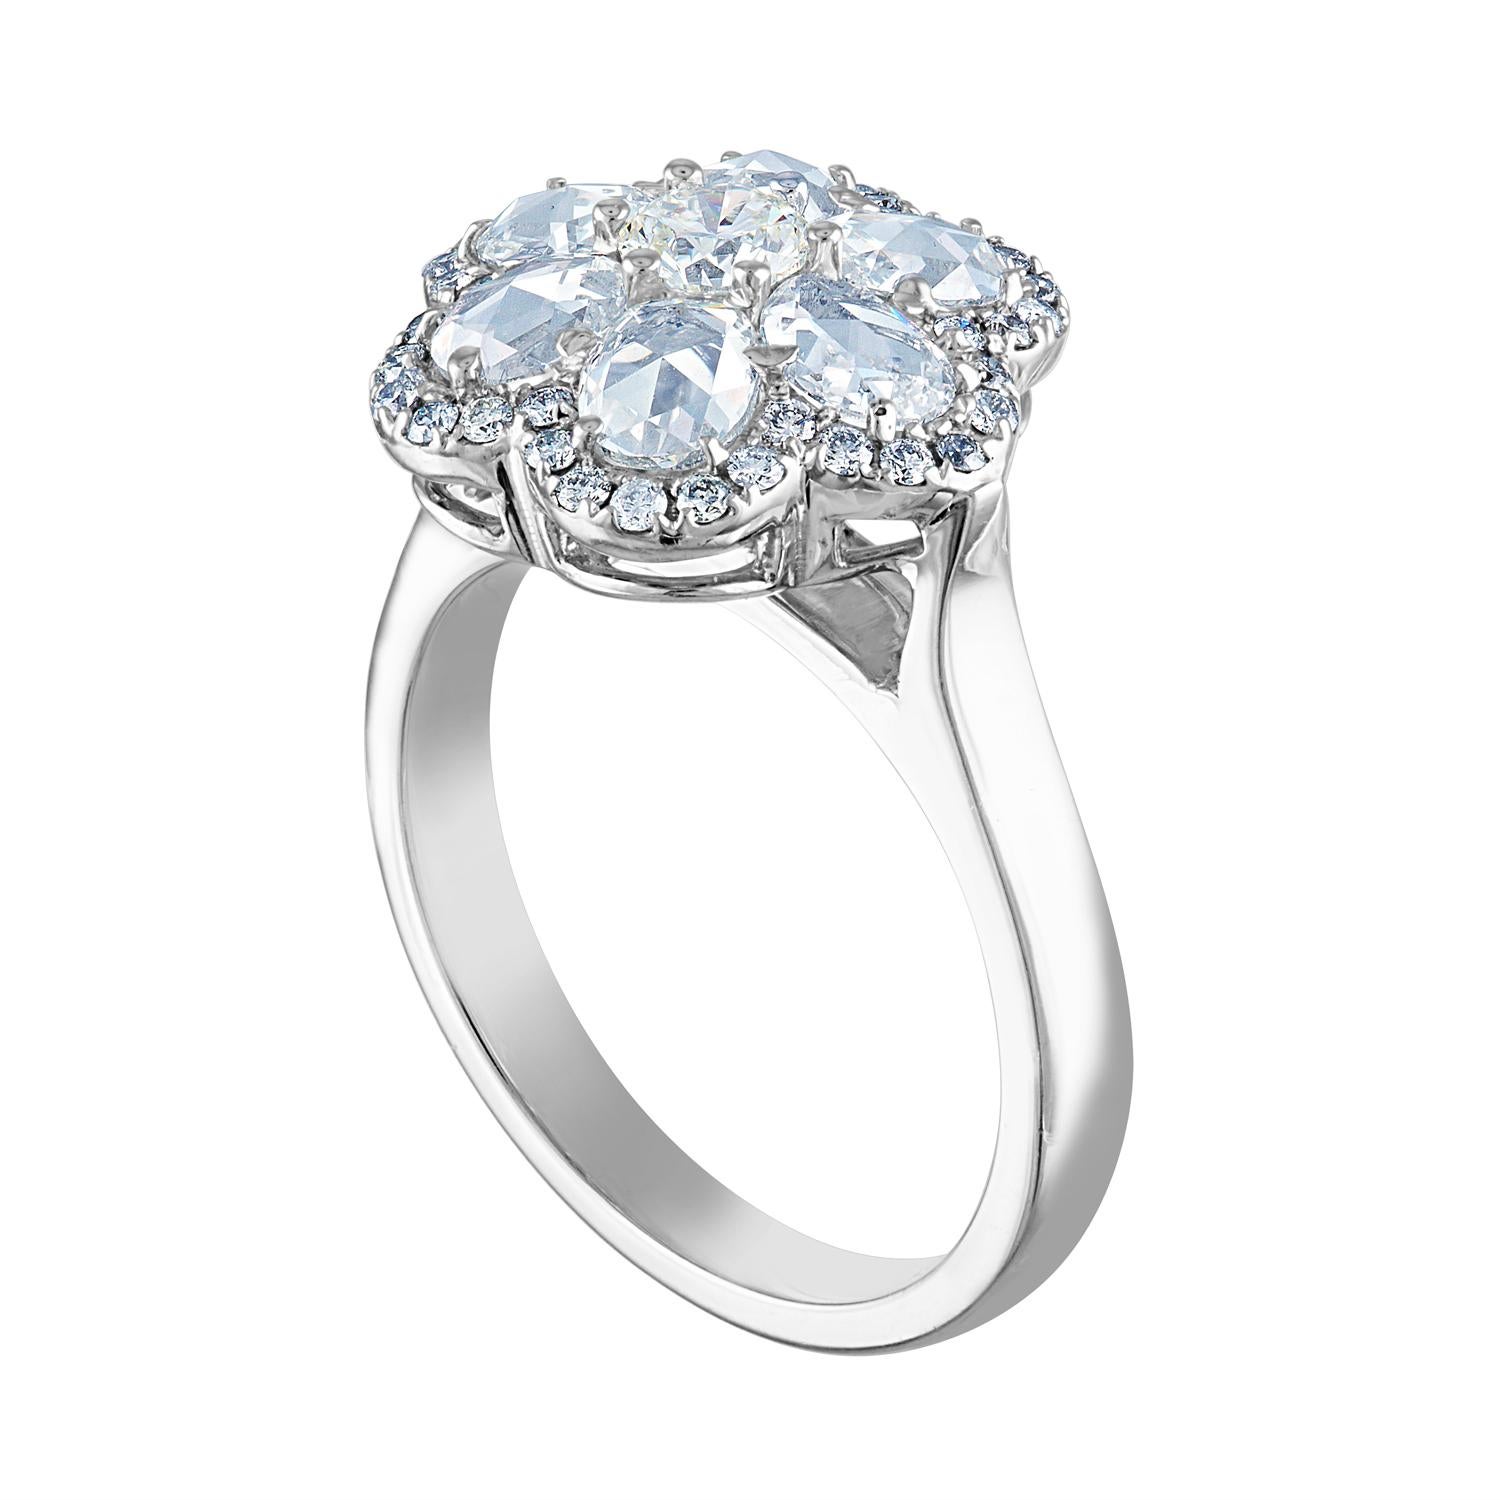 Flower Ring.
The Ring is 18K White Gold.
There are 1.13 Carats Rose Cut Diamonds F VS.
There are 0.52 Carats Small Round Diamonds F VS.
The ring measures about 0.50